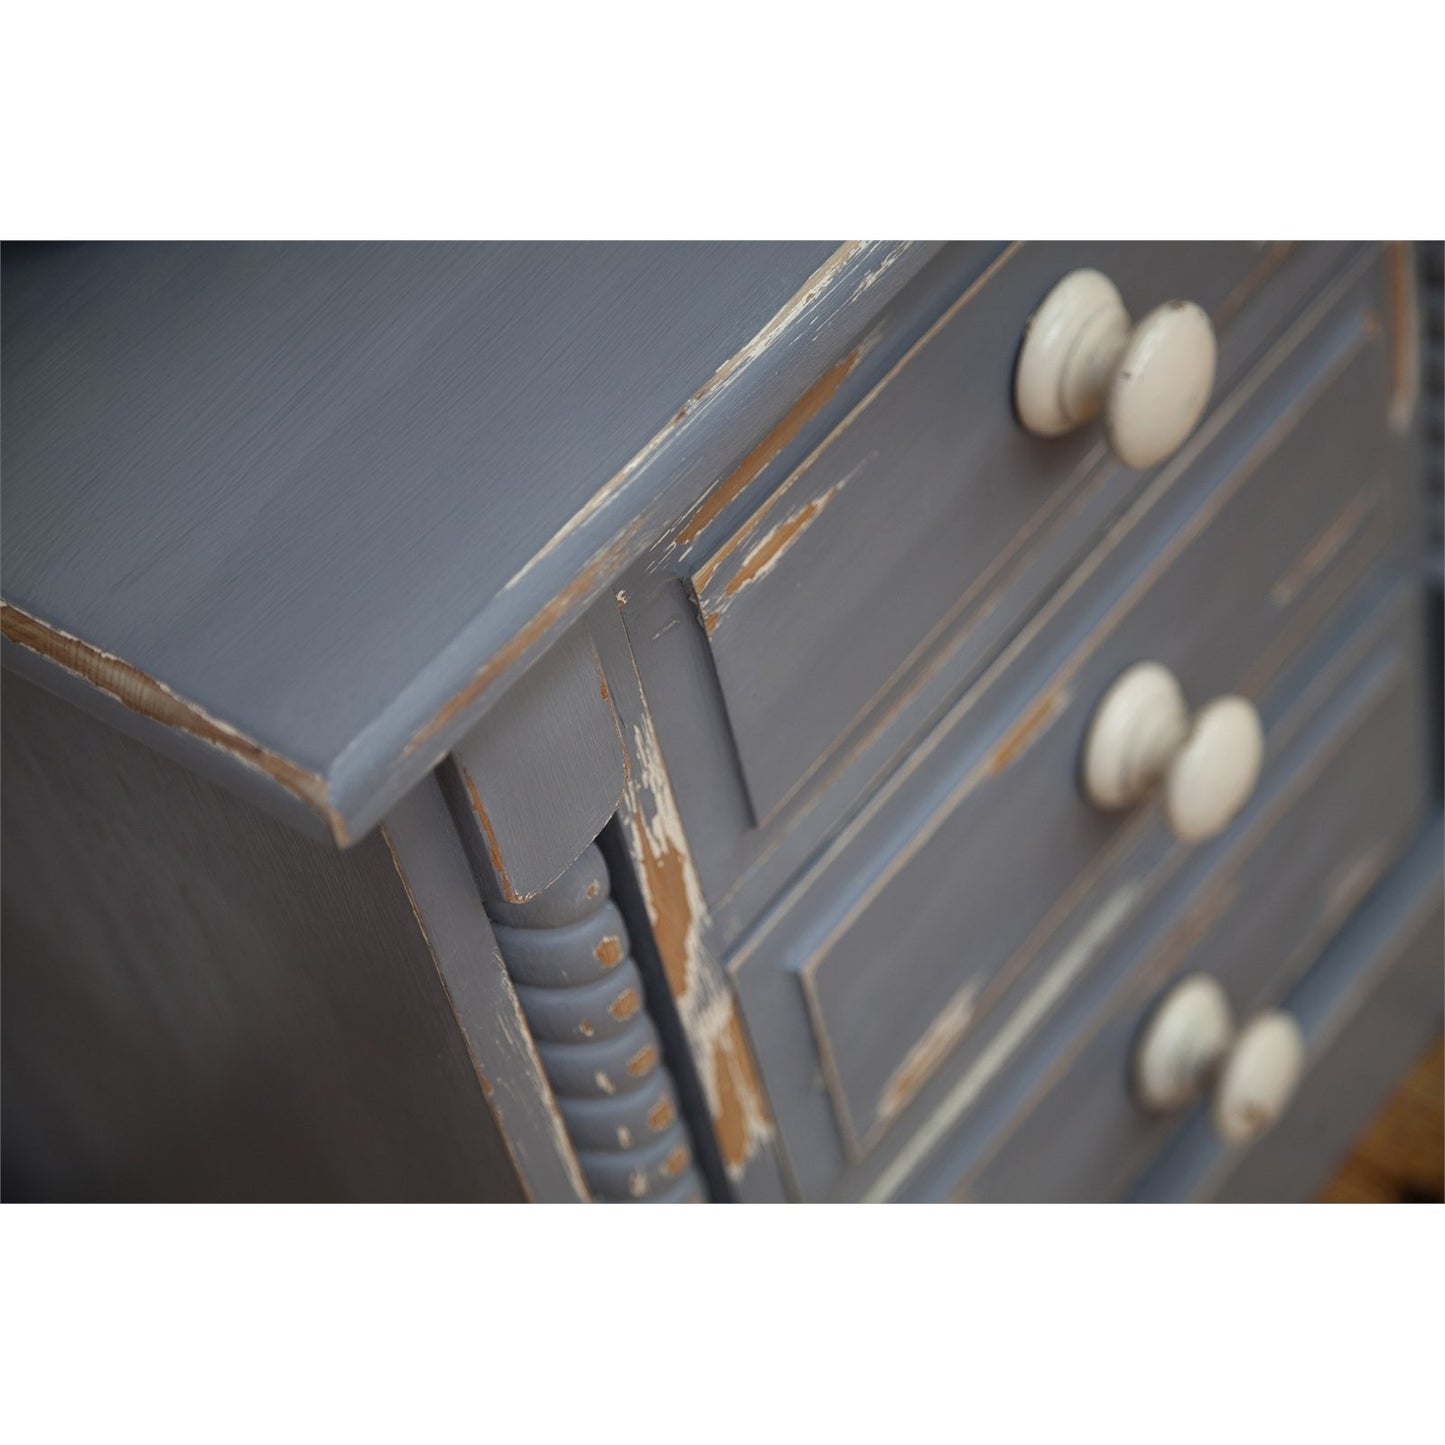 Rust-Oleum Chalky Finish Furniture Paint Anthracite